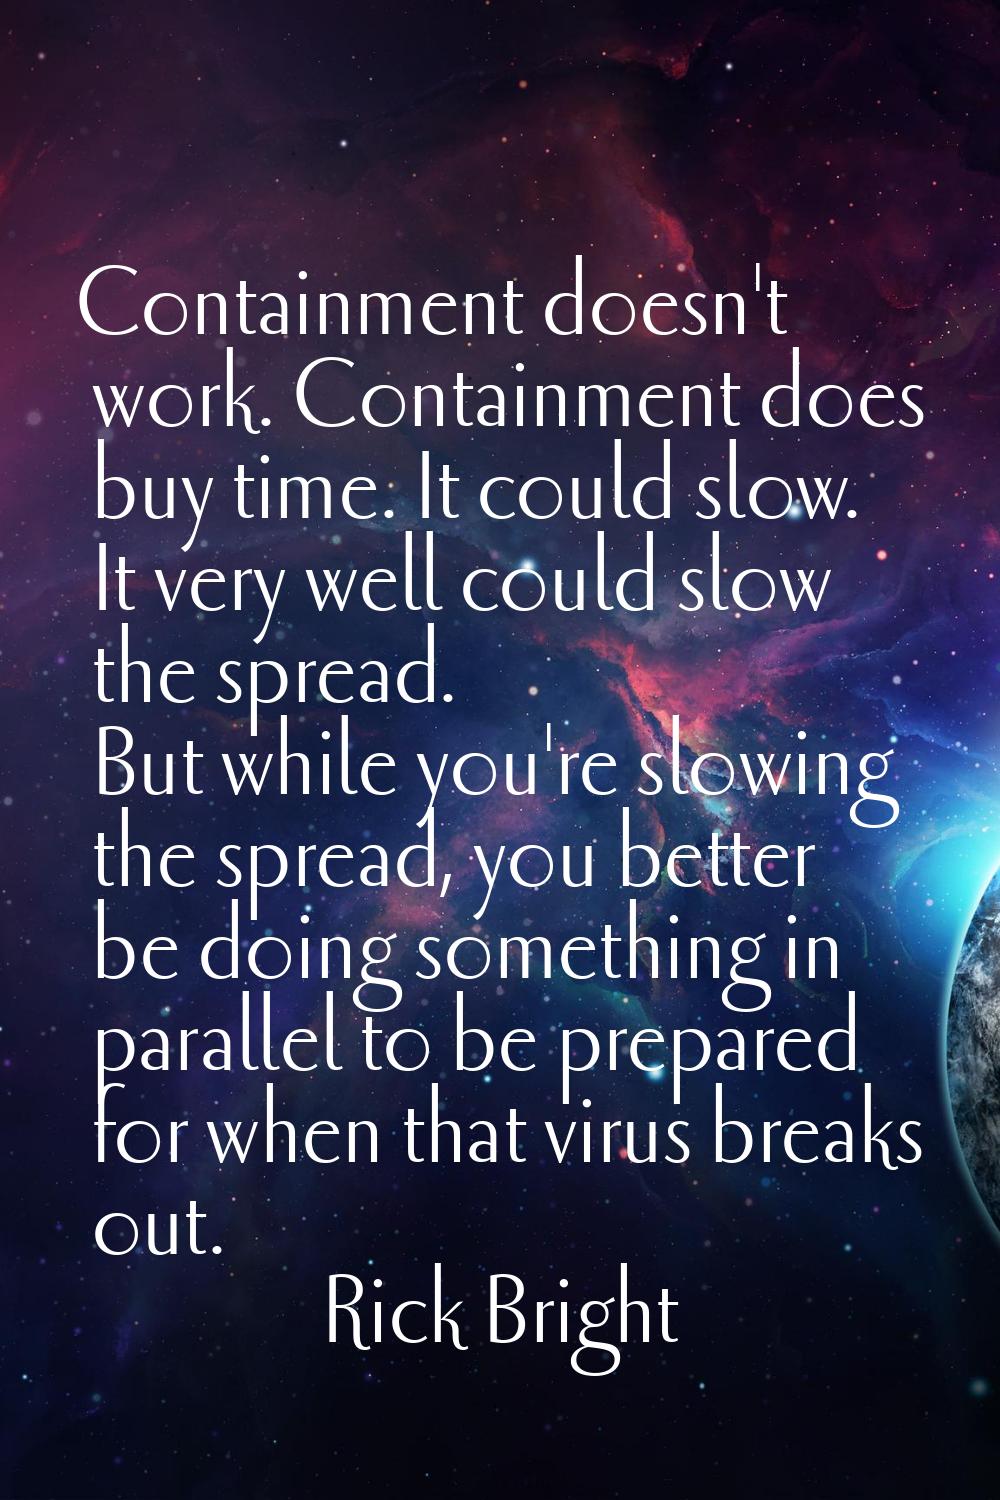 Containment doesn't work. Containment does buy time. It could slow. It very well could slow the spr